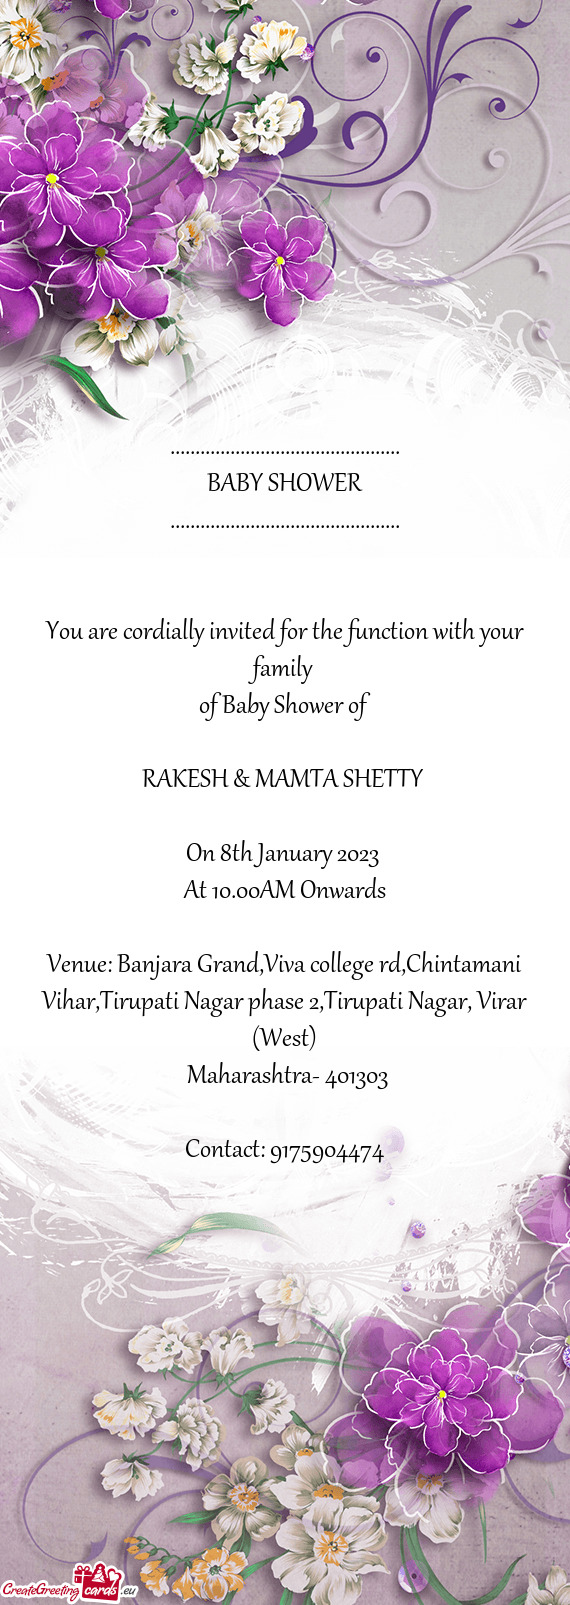 You are cordially invited for the function with your family